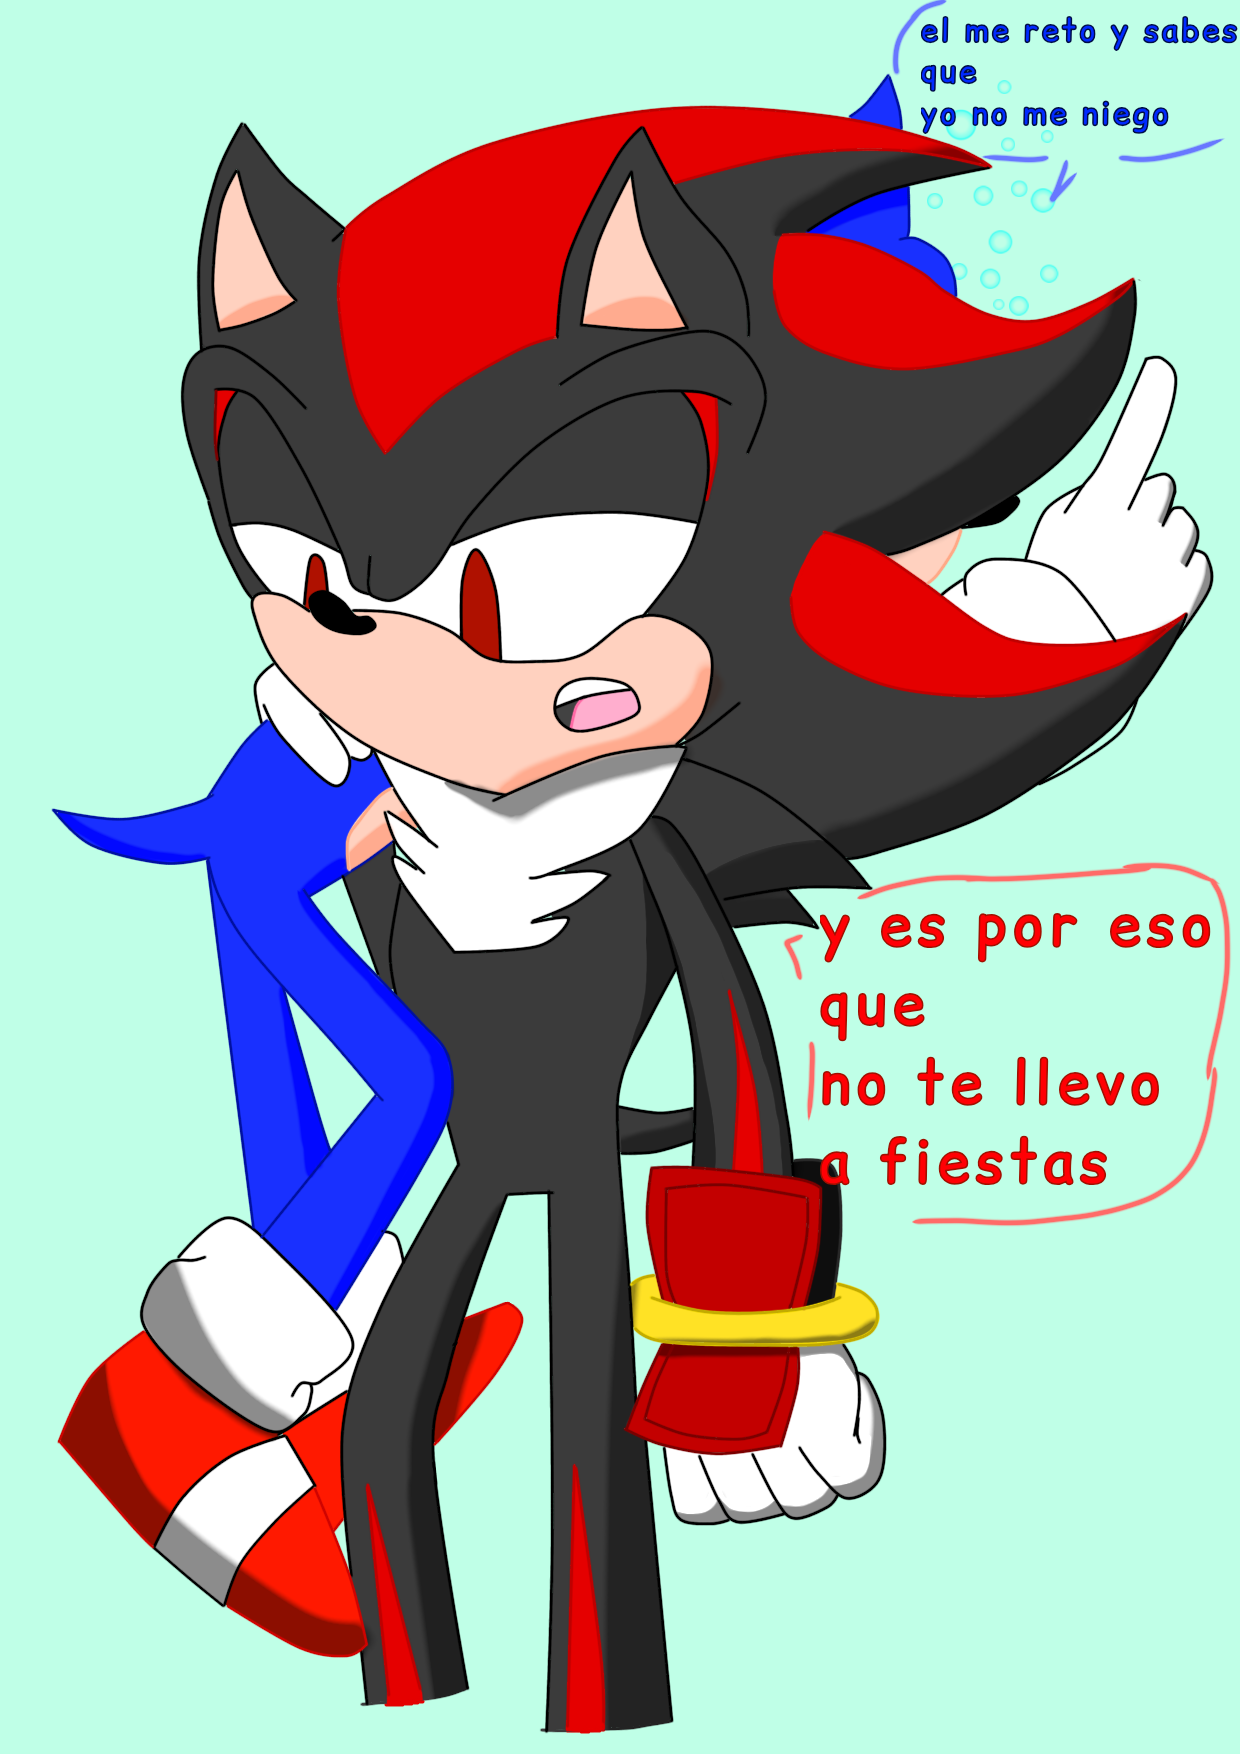 Sonic and shadow by anathewerehog on DeviantArt